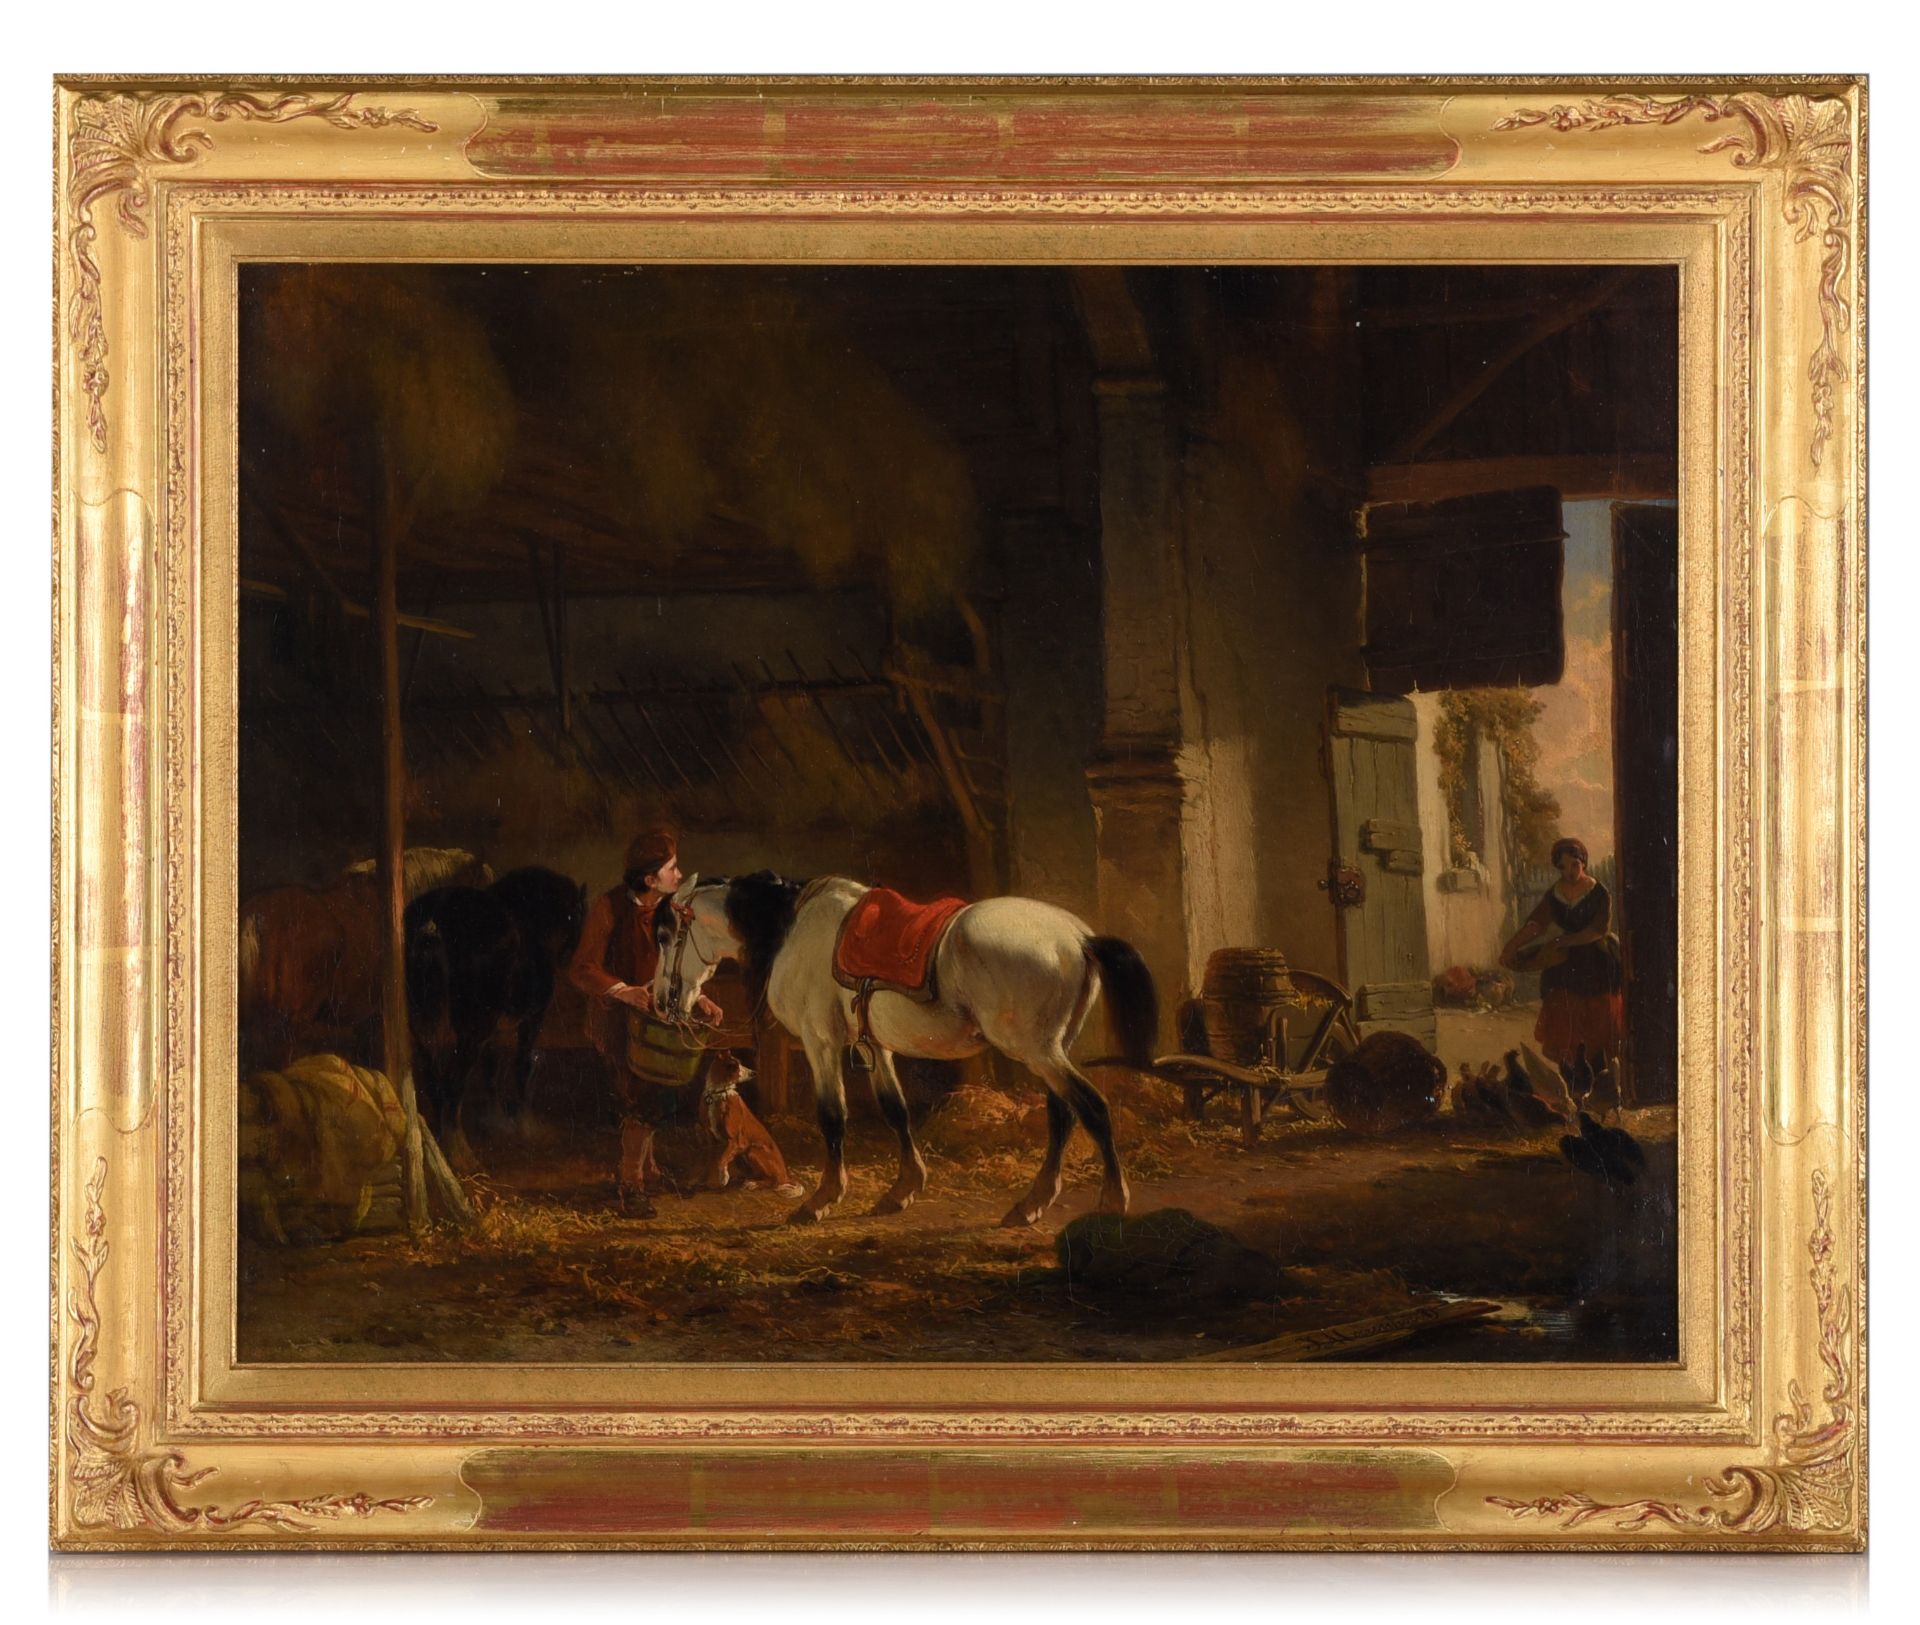 Joseph Moerenhout, Horses in a barn, 19thC, oil on canvas, 38 x 49 cm - Image 2 of 8